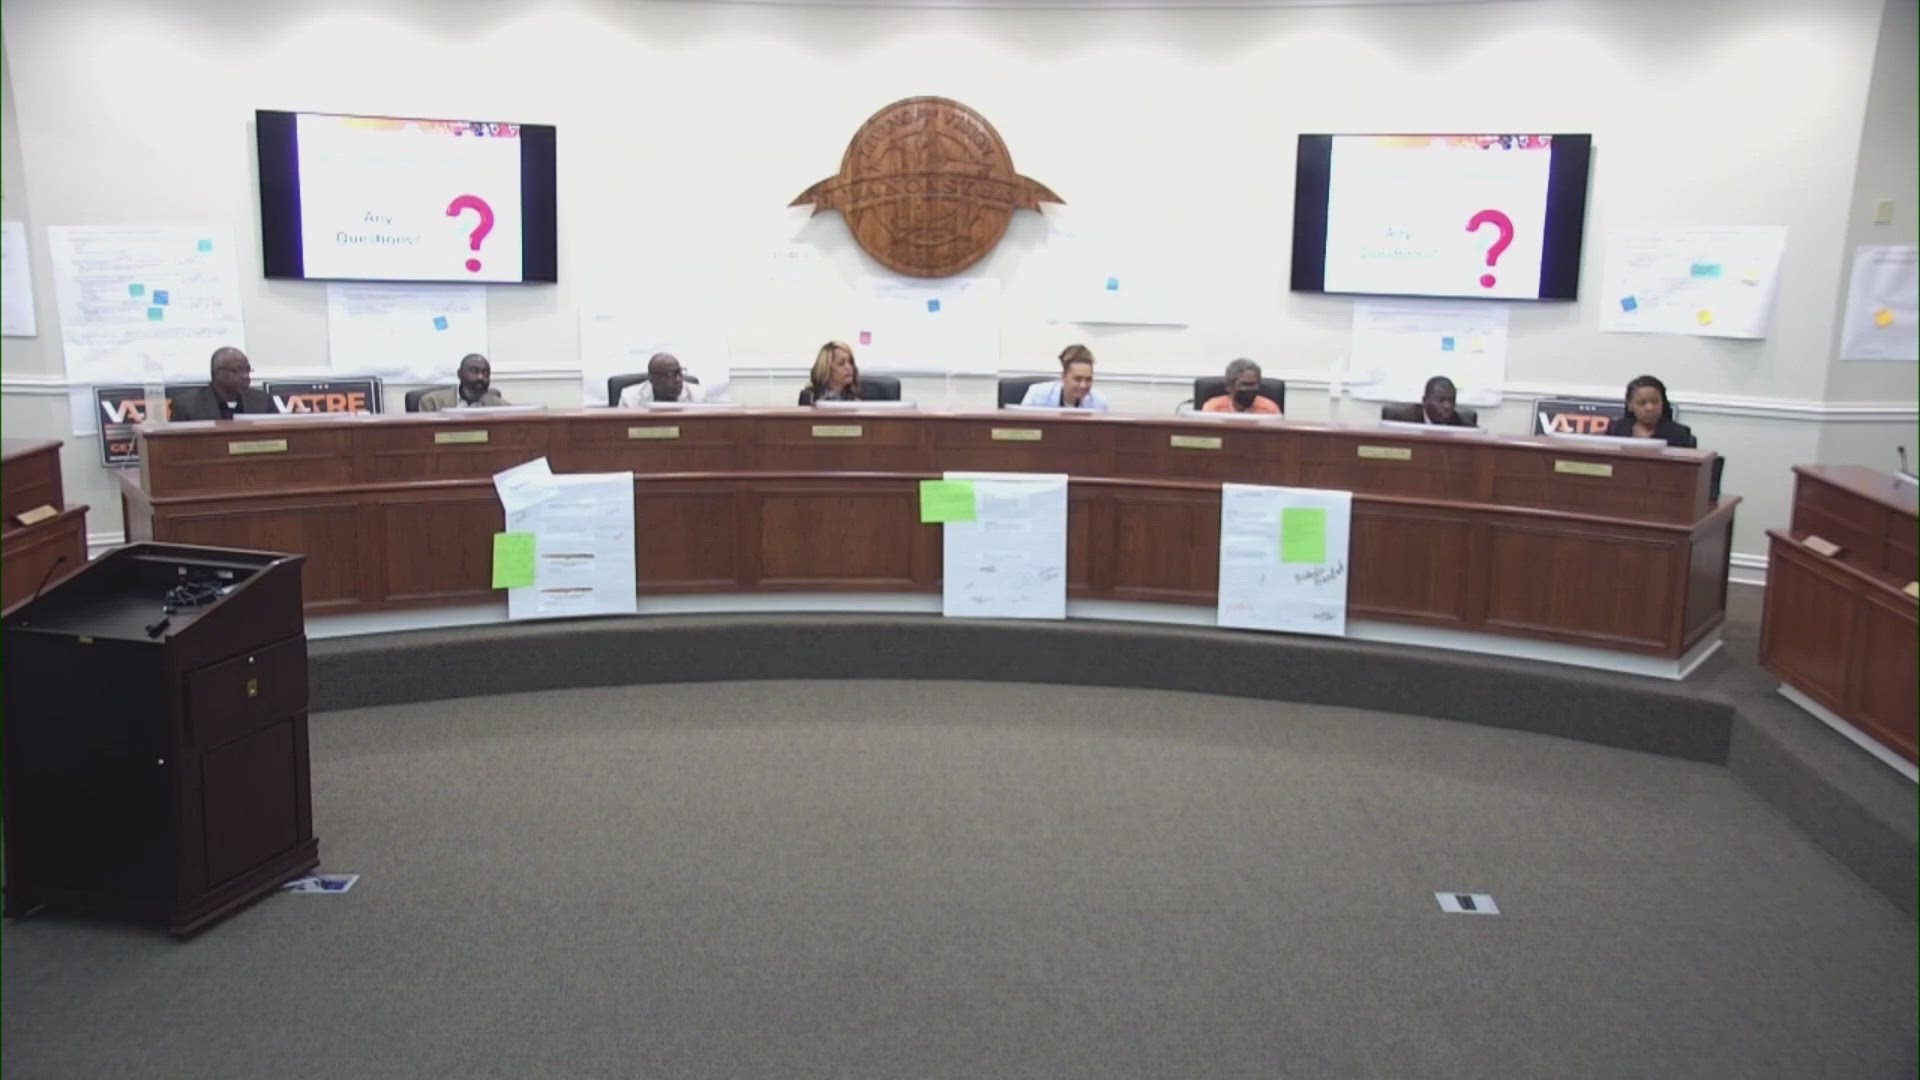 The board president said the two have consistently disregarded governance protocols, shown a lack of respect for fellow board members and disrupted meetings.